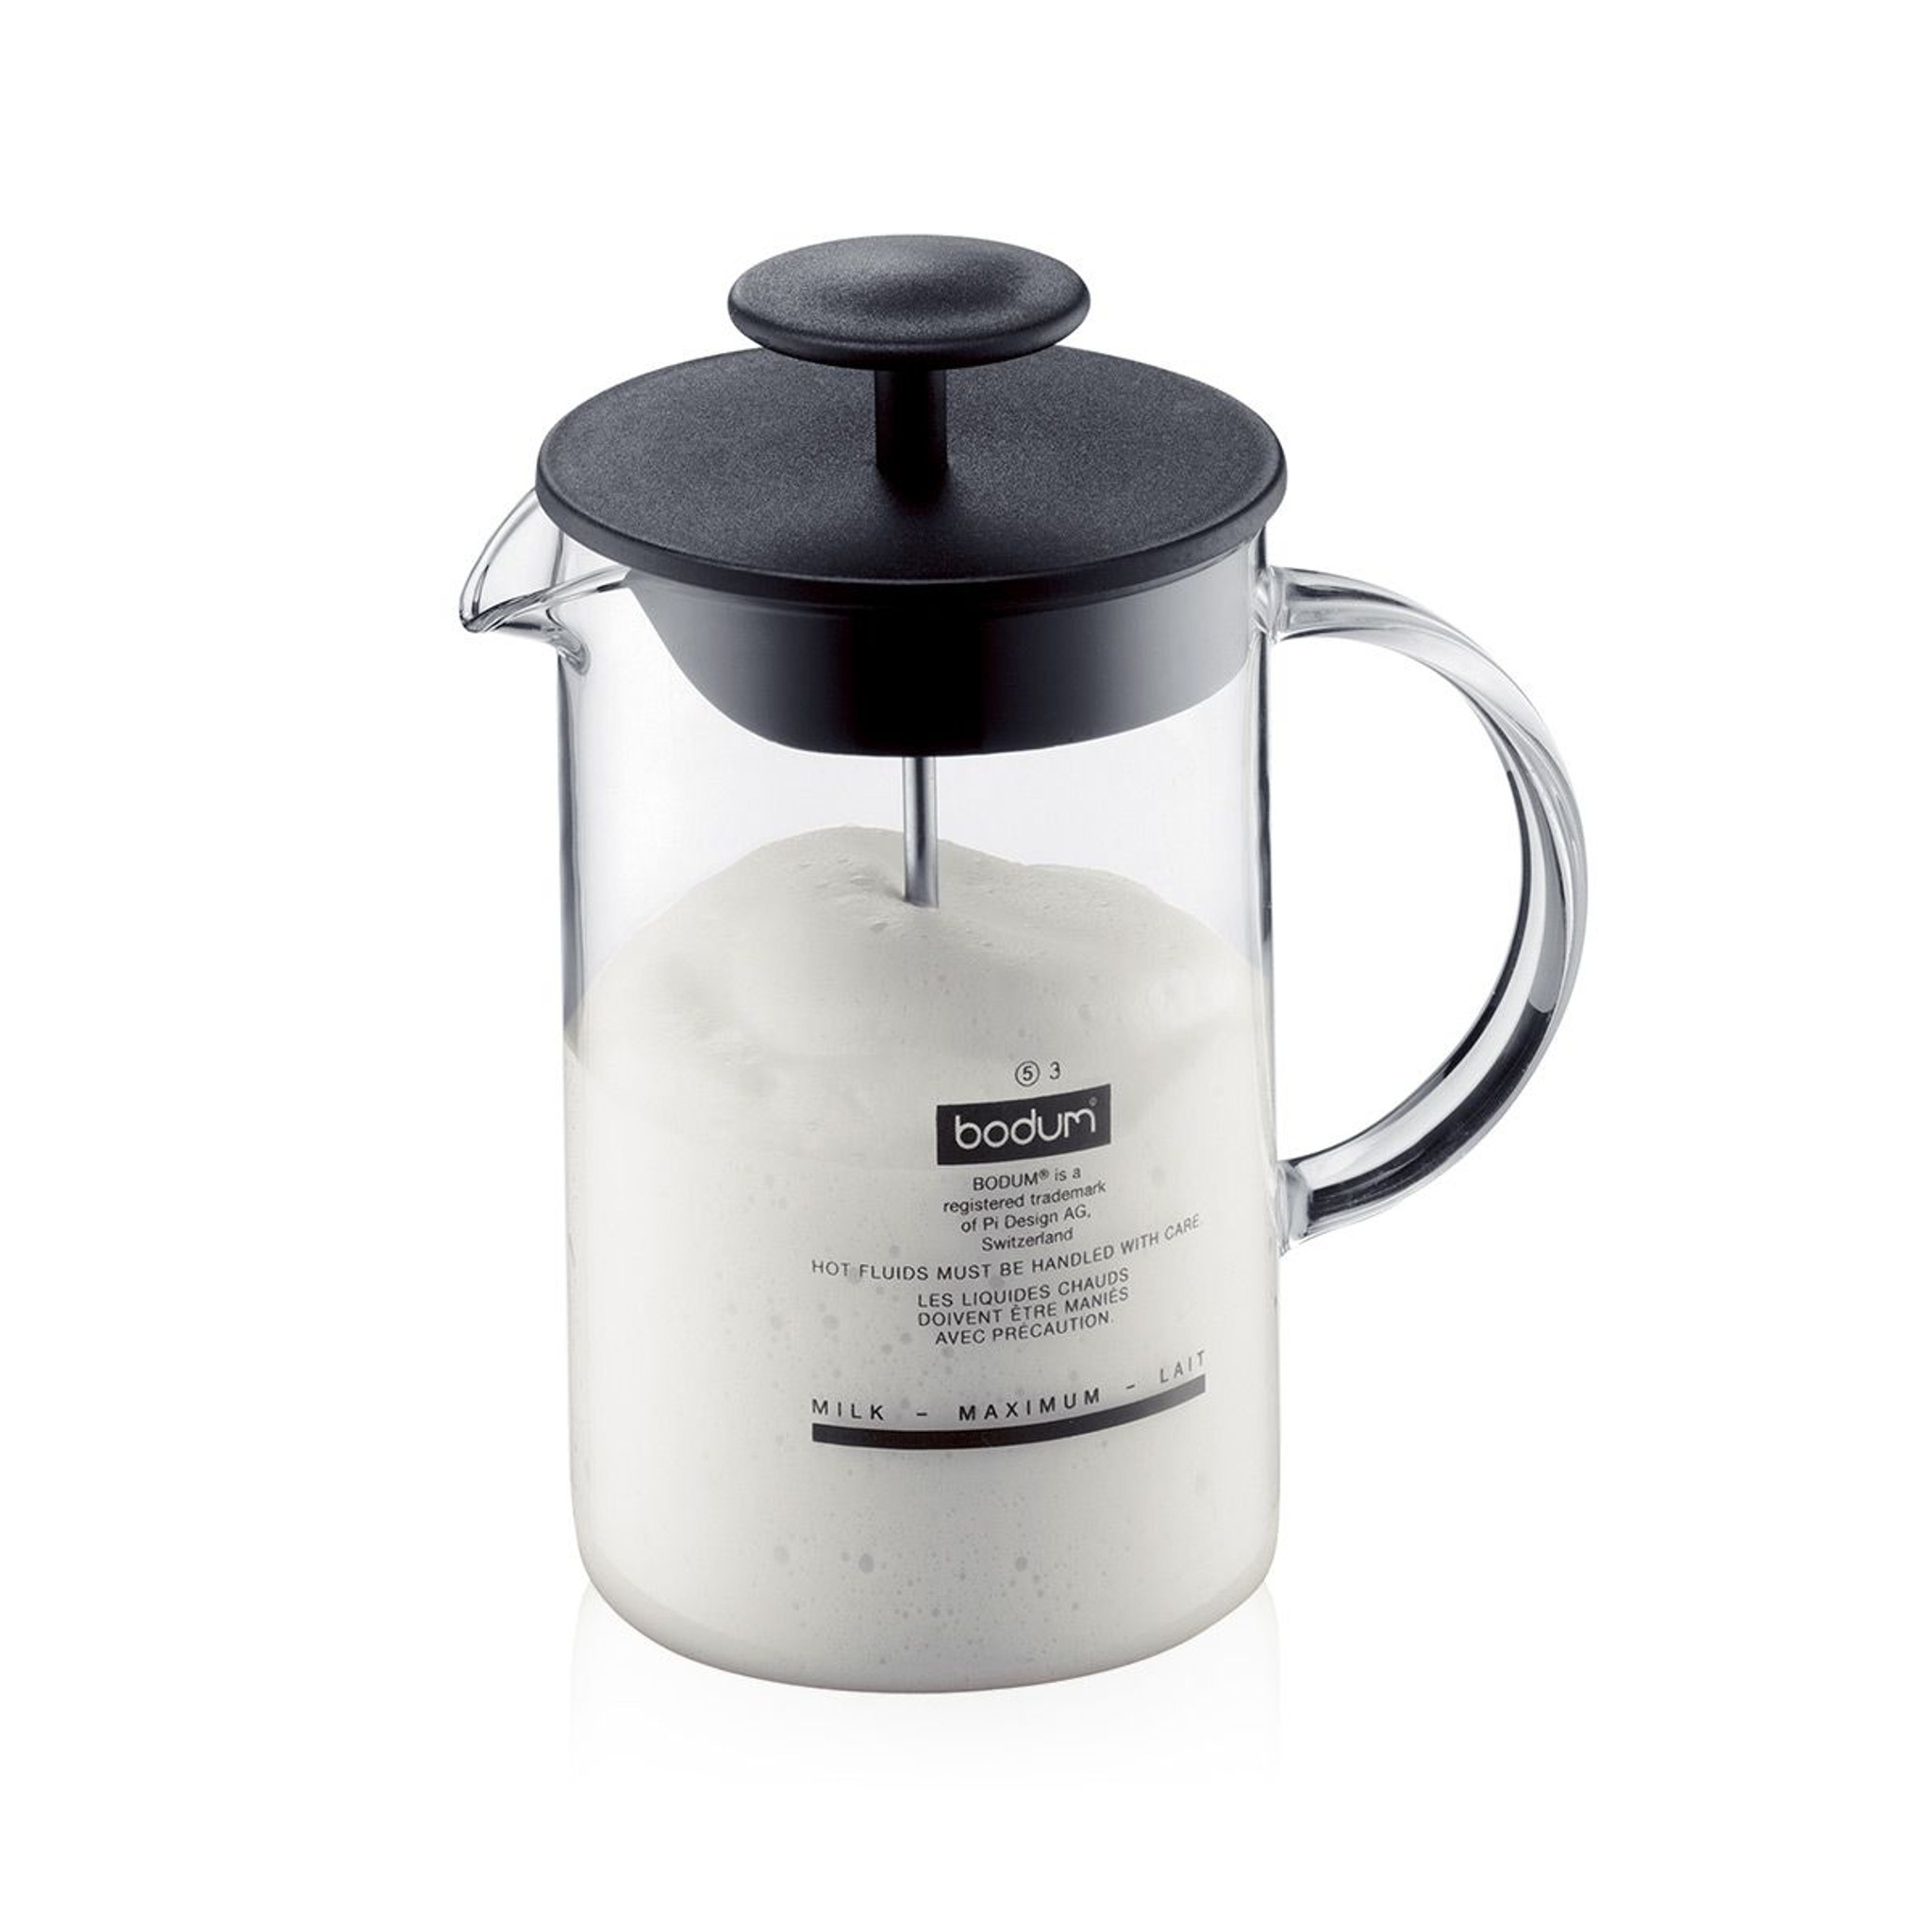 HOTEC - Bodum Milk Frother with glass handle In less than 30